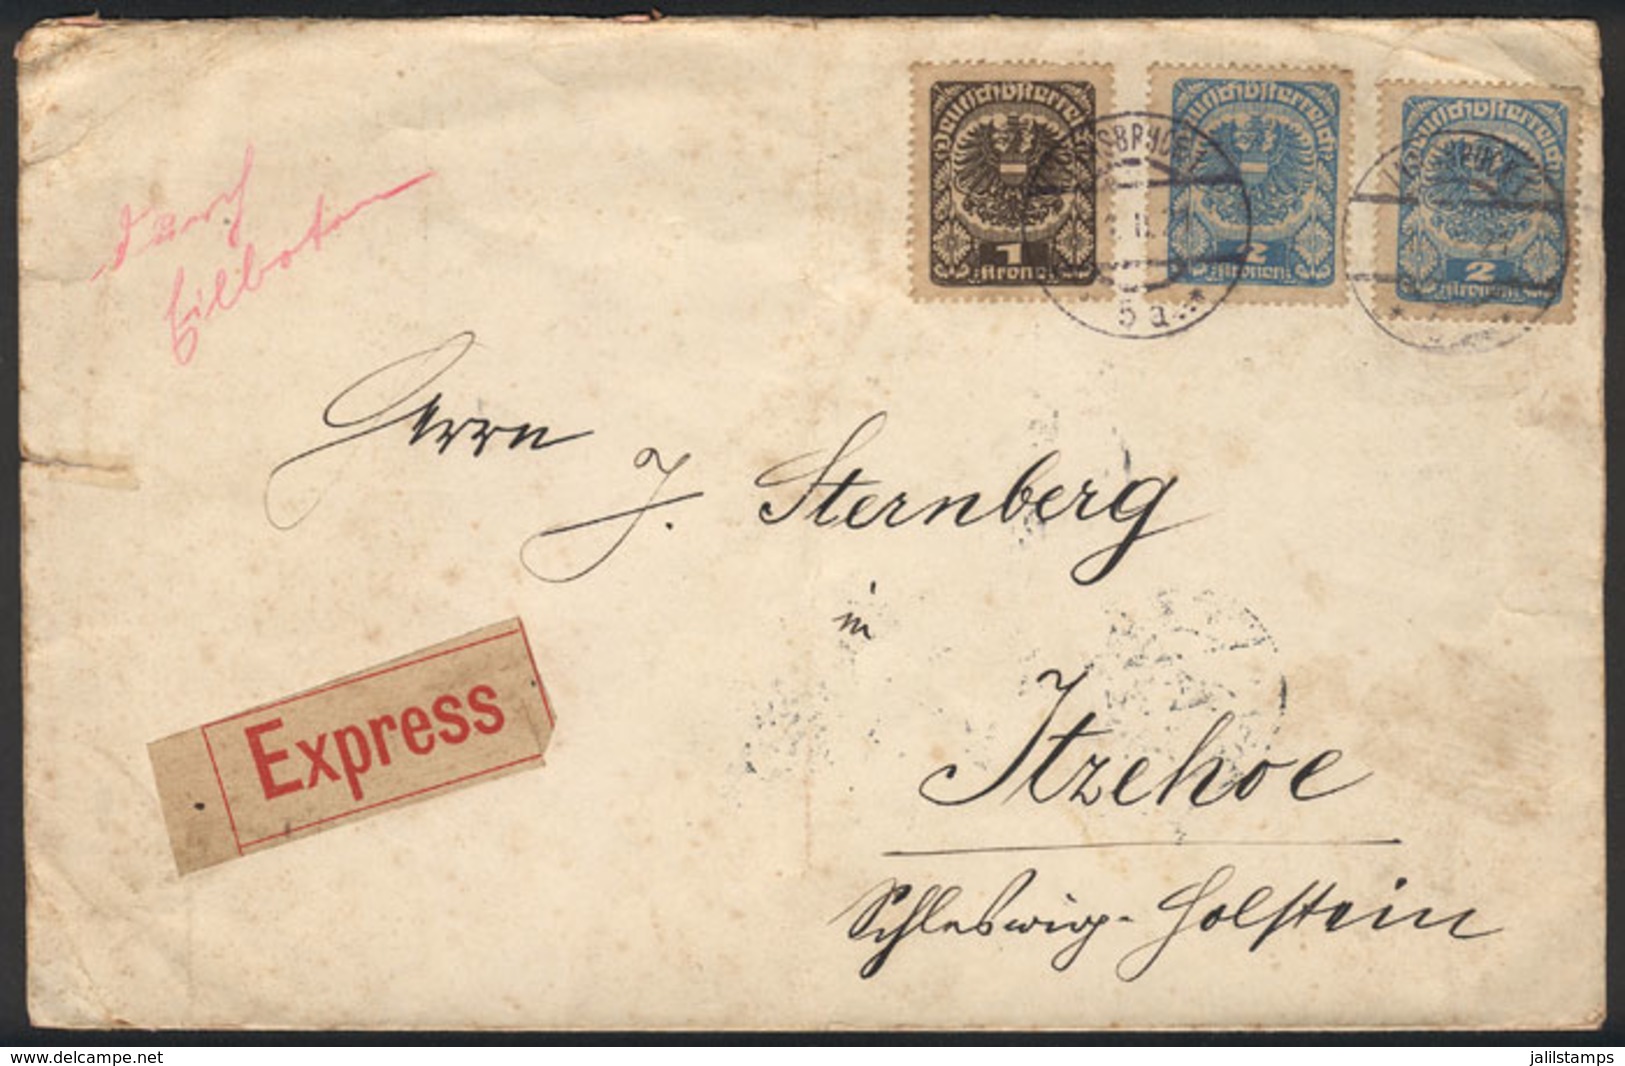 AUSTRIA: 6/FE/1921 Innsbruck - Itzehoe: Express Cover Franked With 5k., With Arrival Backstamp (13/FE) - Lettres & Documents